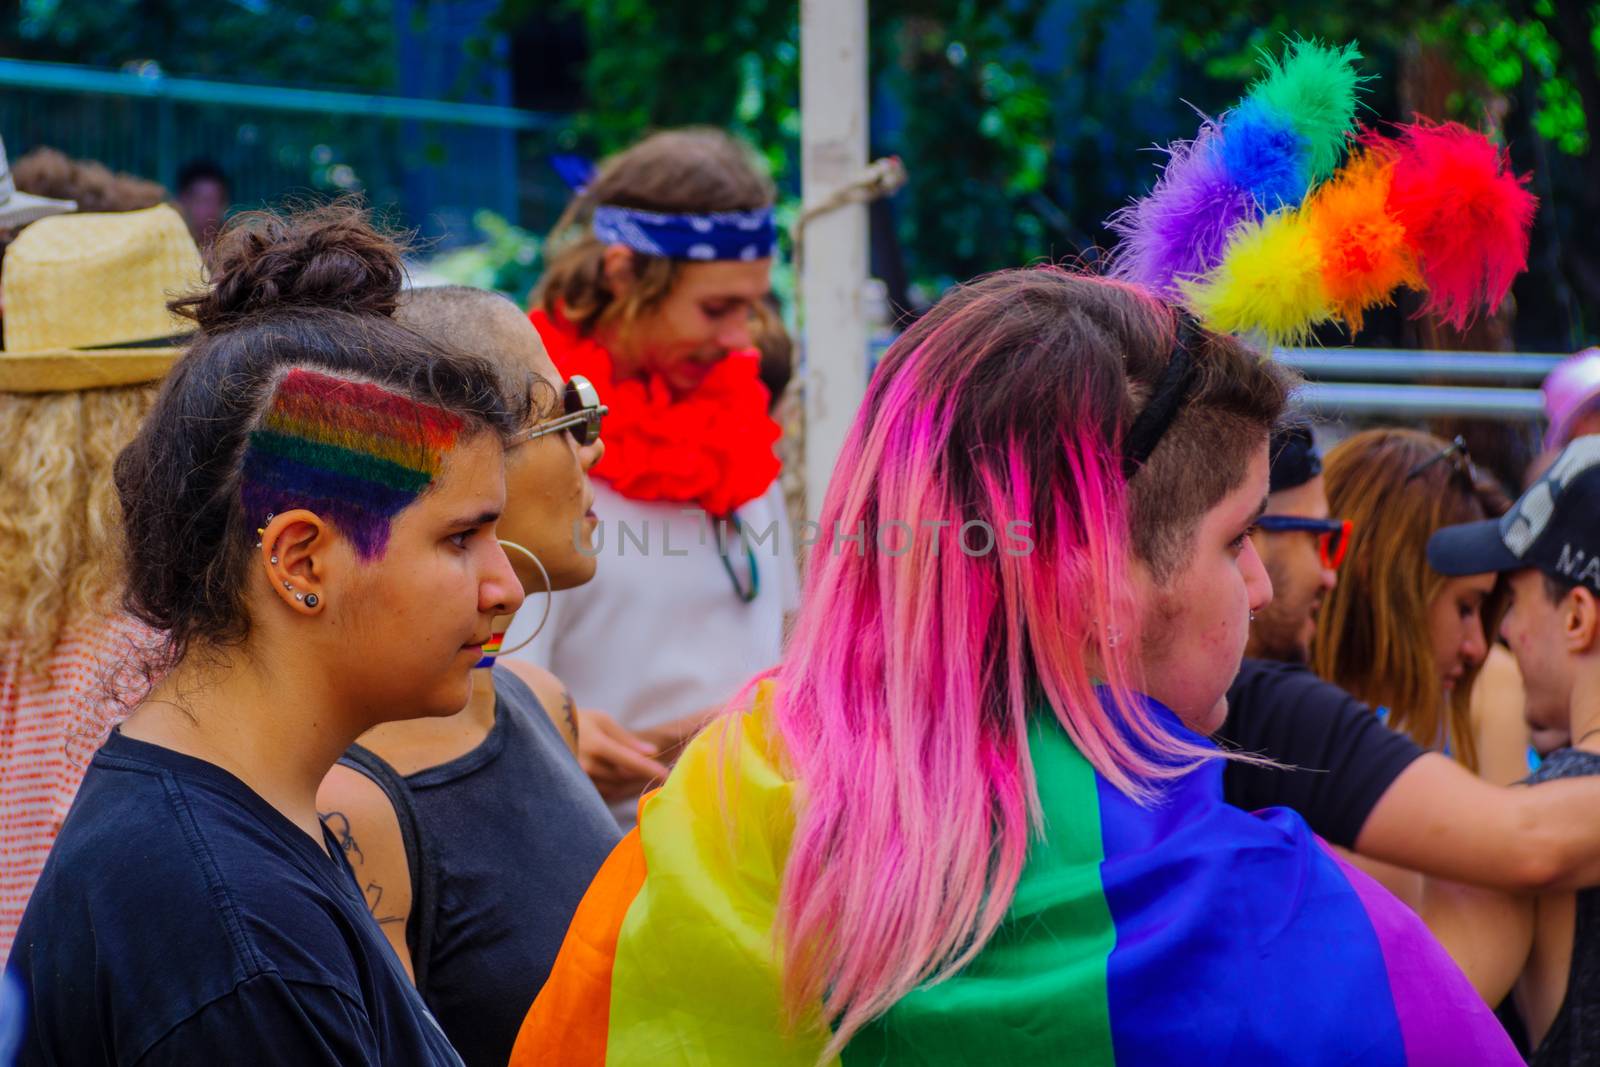 HAIFA, Israel - June 30, 2017: Participants in the annual pride parade of the LGBT community, in the streets of Haifa, Israel